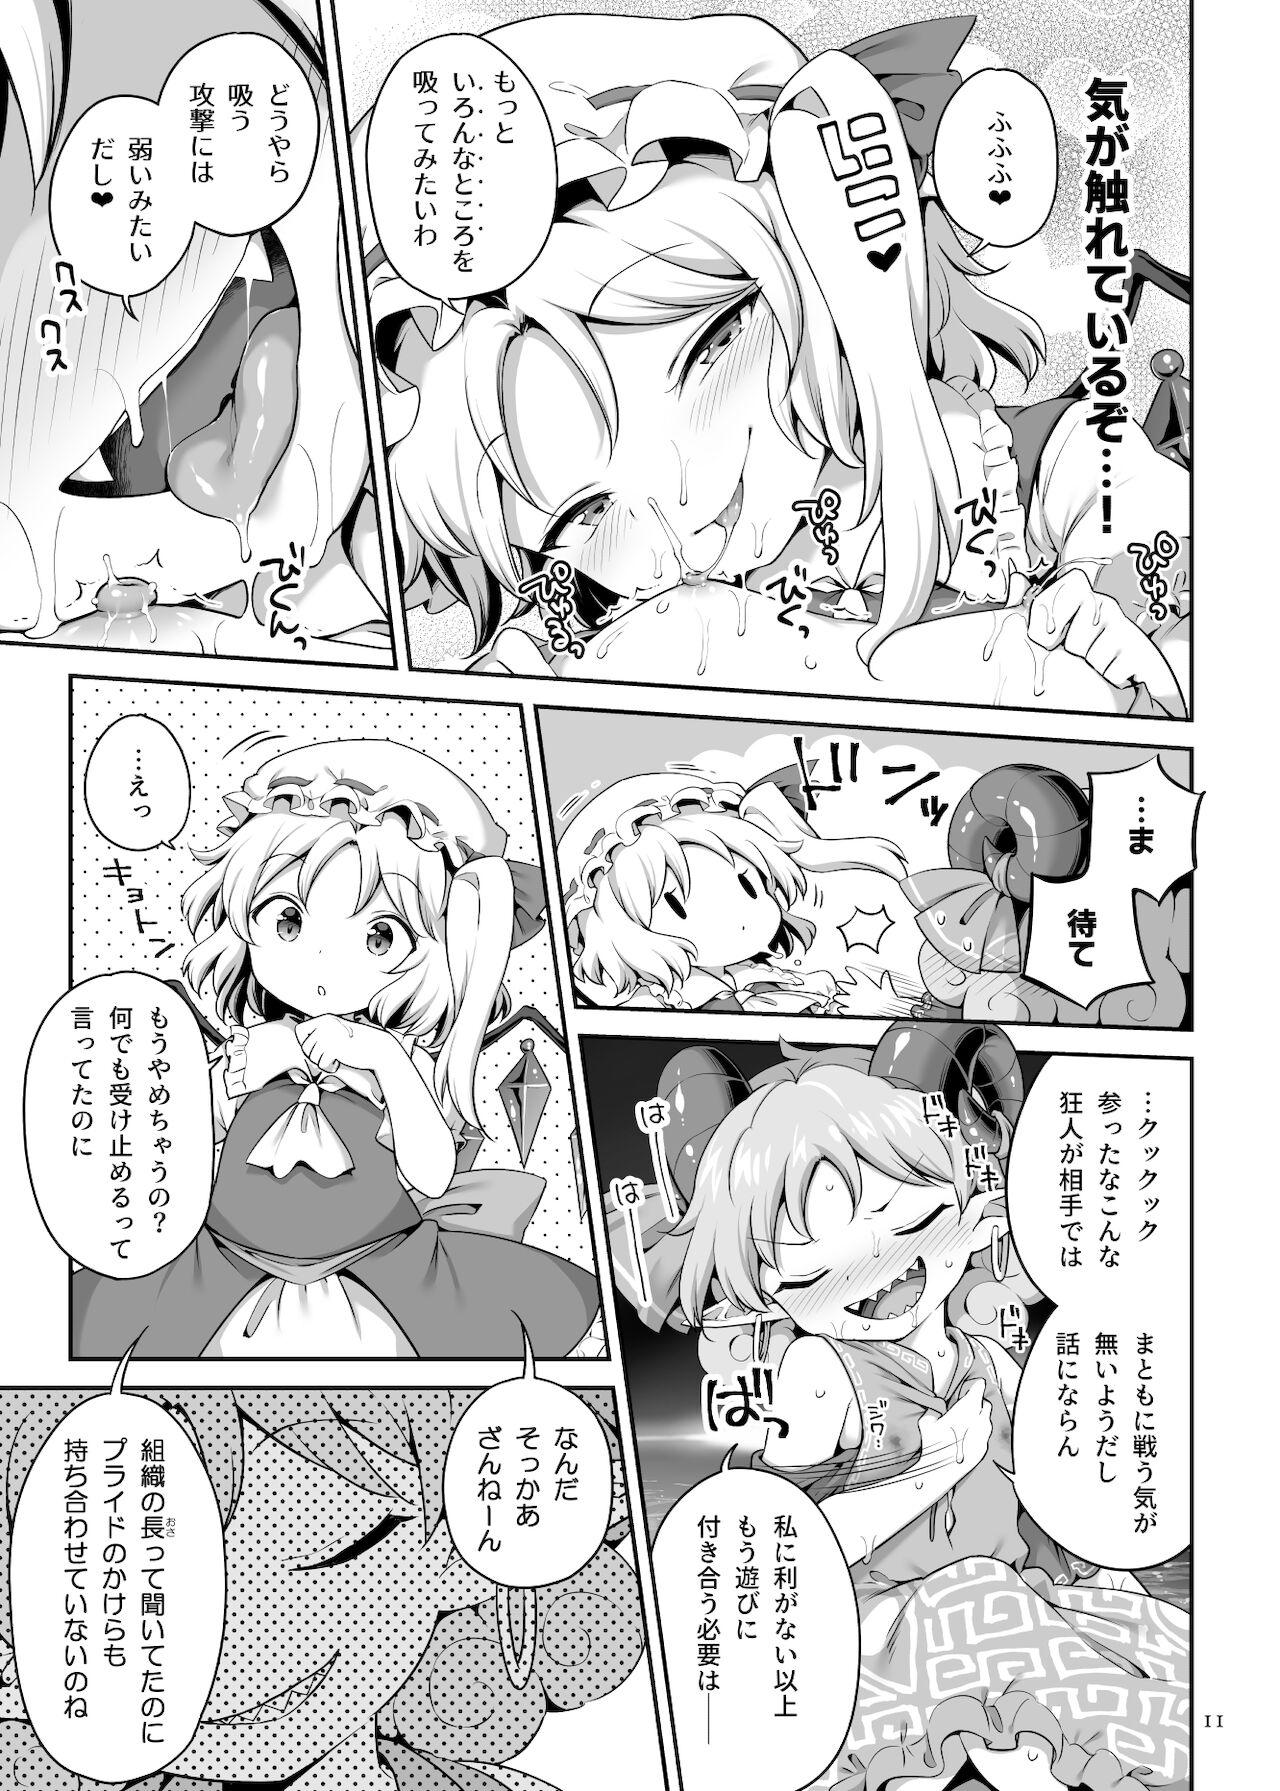 Camporn 吸われて駄目なら吸ってみろ! - Touhou project Fishnets - Page 11